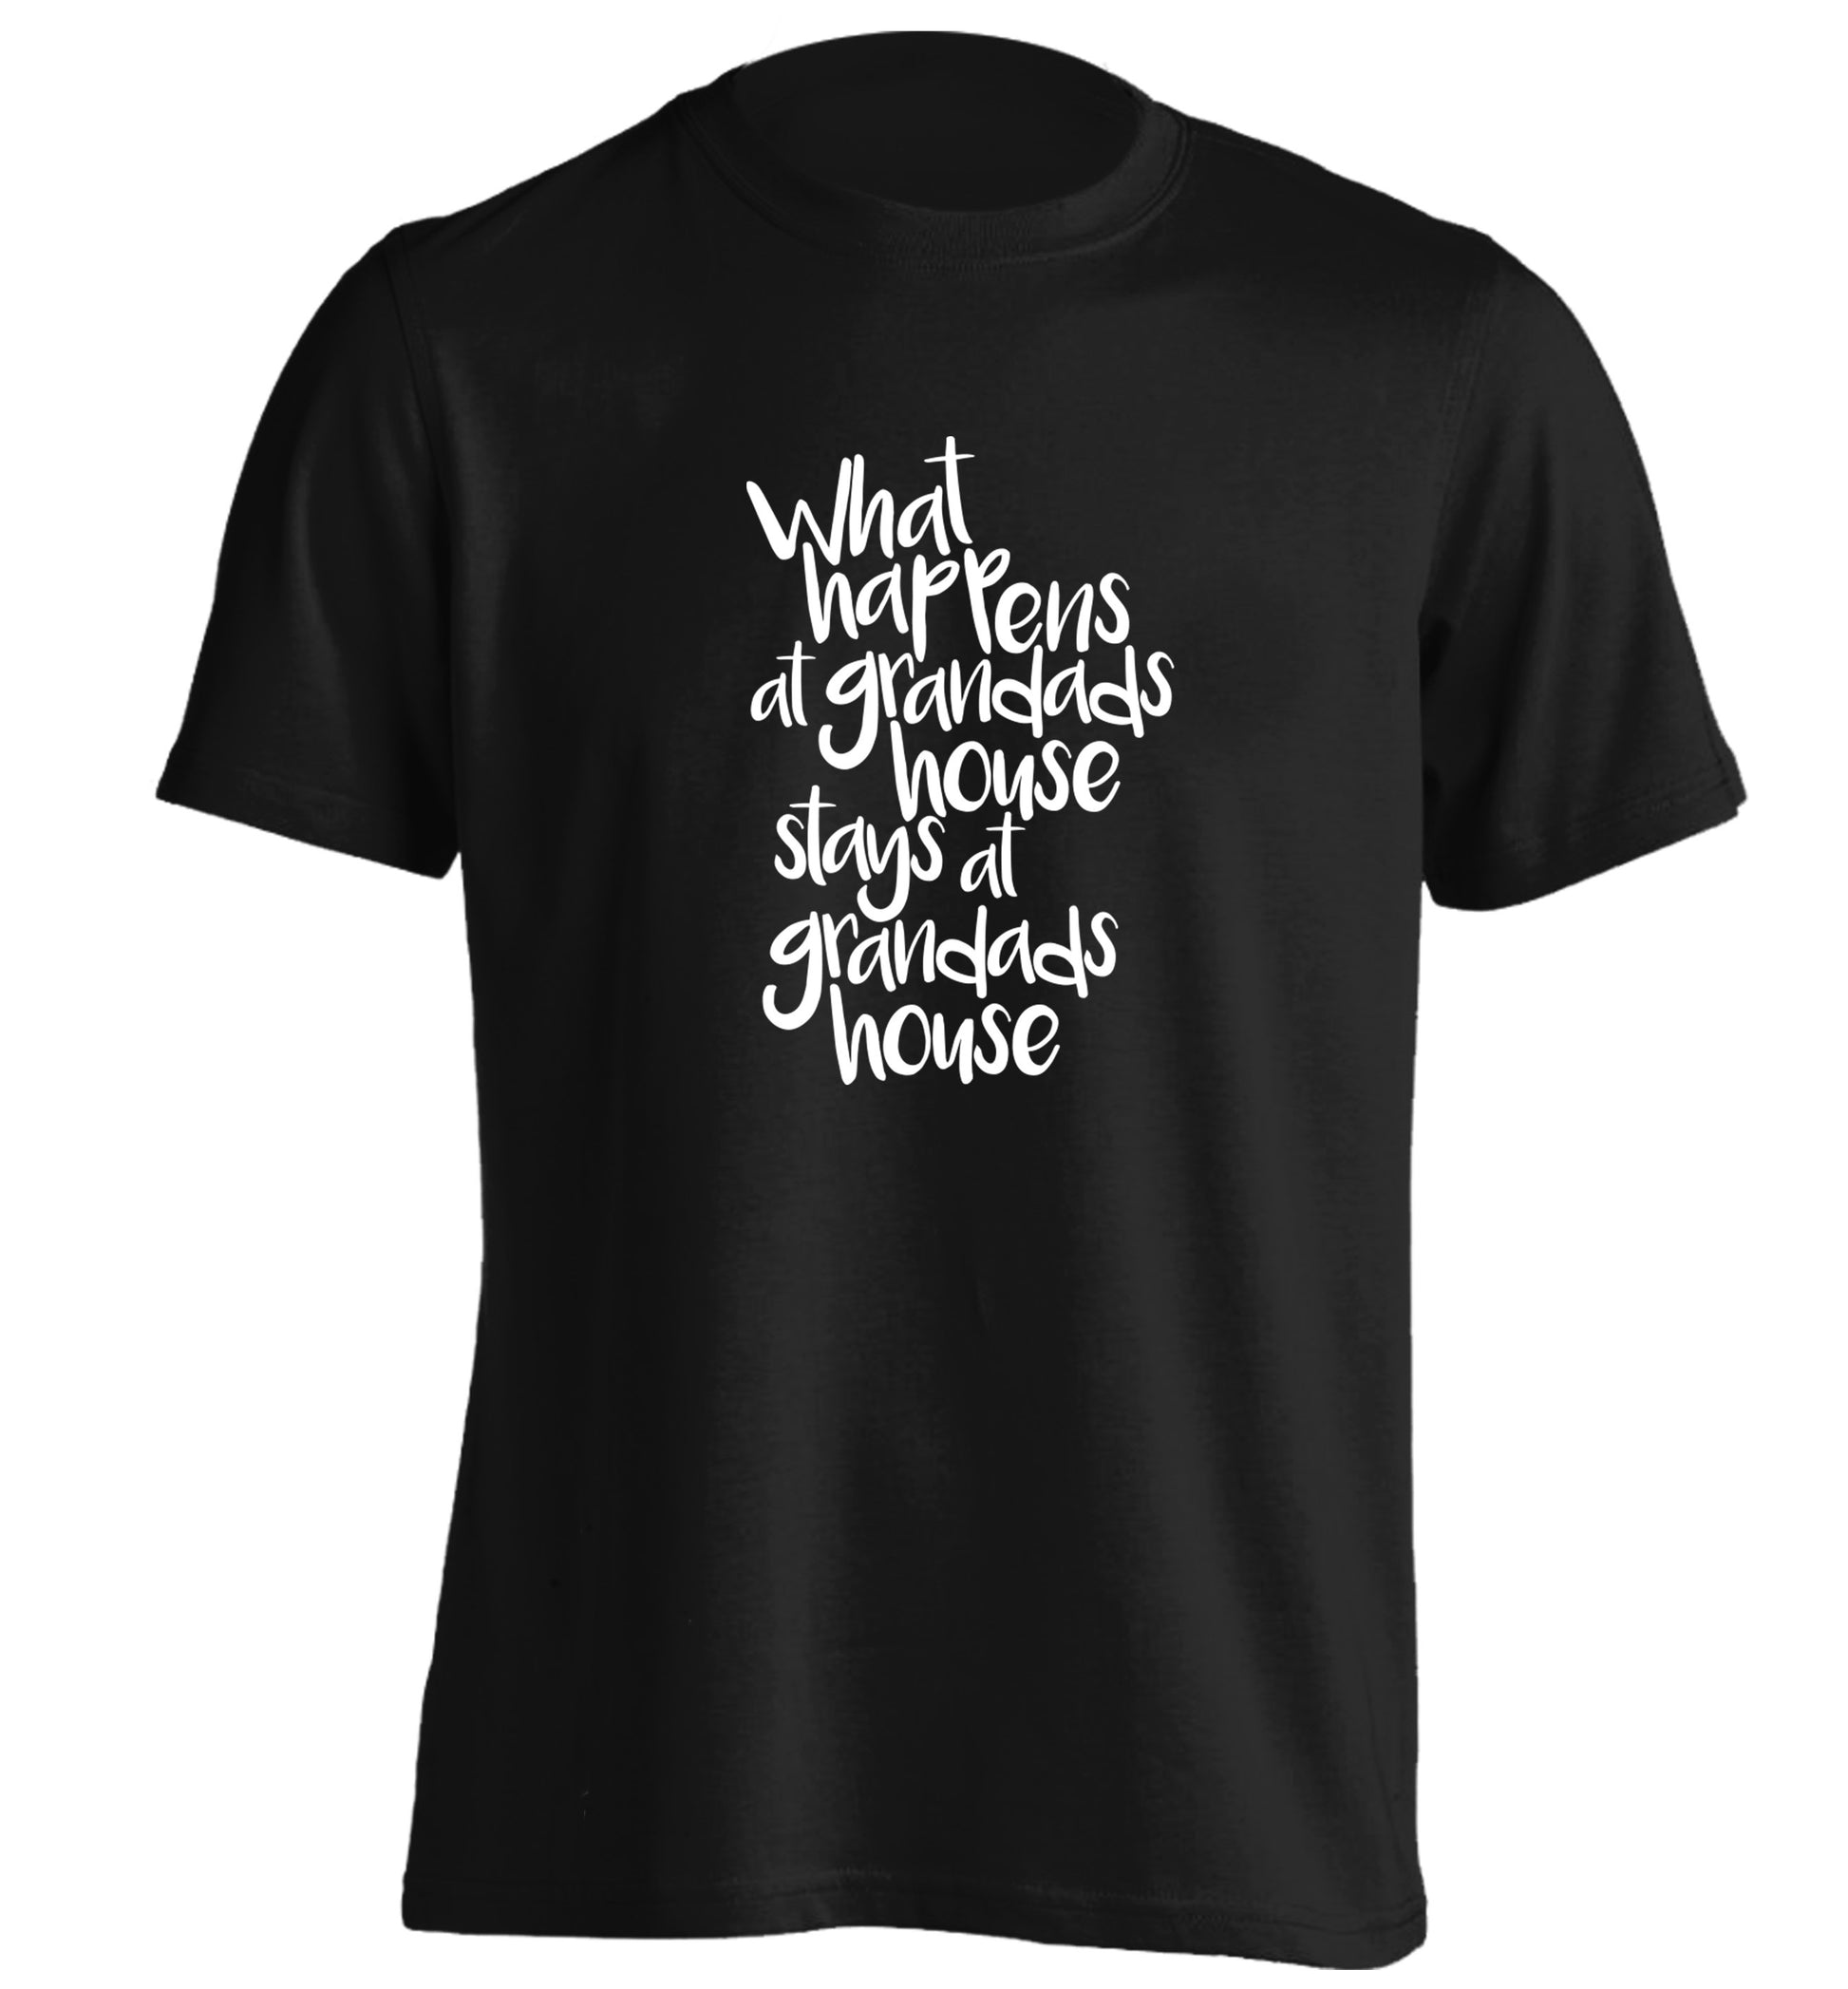 What happens at grandads house stays at grandads house adults unisex black Tshirt 2XL